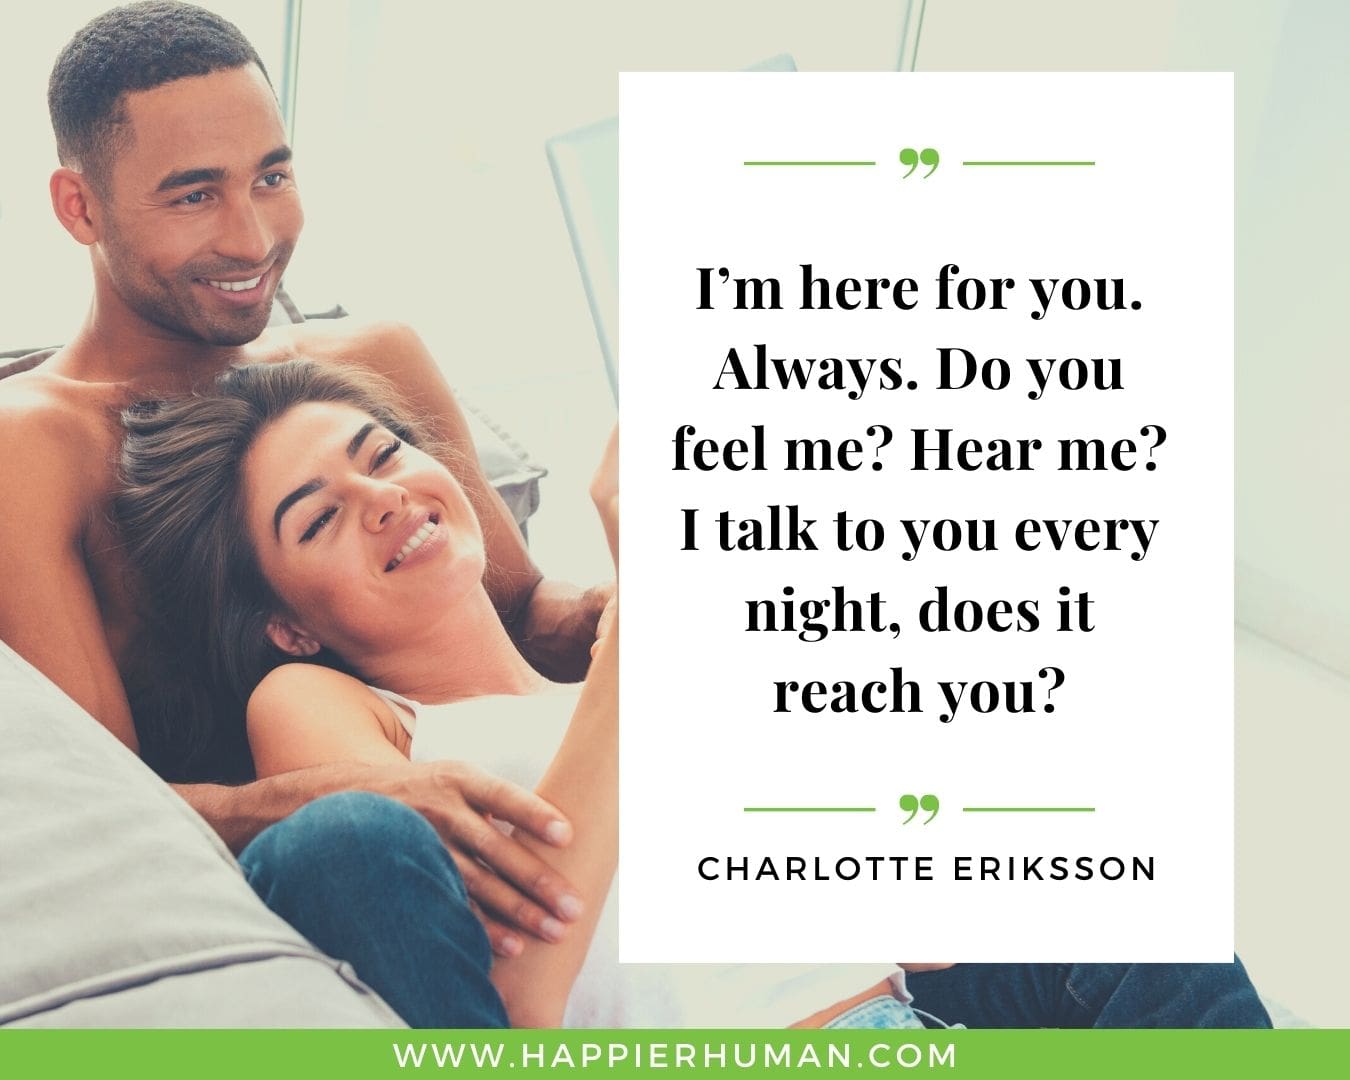 I’m Here for You Quotes - “I’m here for you. Always. Do you feel me? Hear me? I talk to you every night, does it reach you?” – Charlotte Eriksson